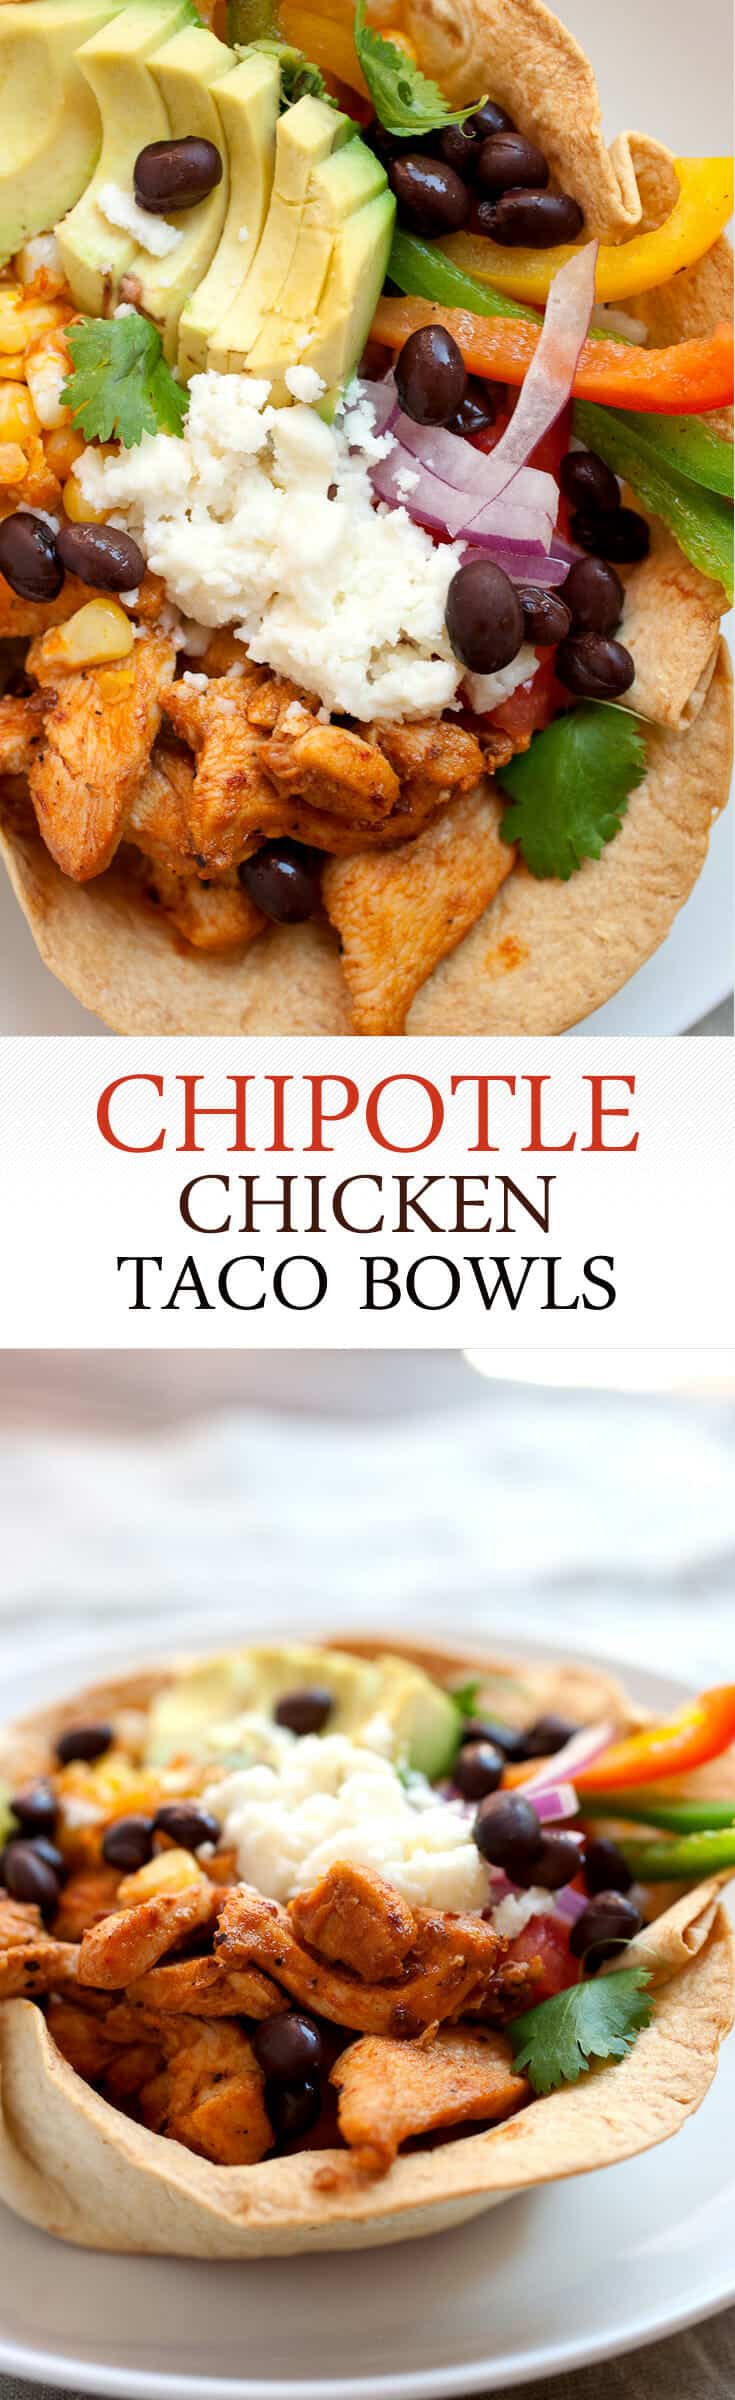 Chipotle Chicken Taco Bowls! I don't mean Chipotle like the restaurant, these chicken taco bowls are so much better! Spicy chipotle chicken layered with corn, black beans, cilantro rice, and other great taco toppings in an edible taco bowl! | macheesmo.com